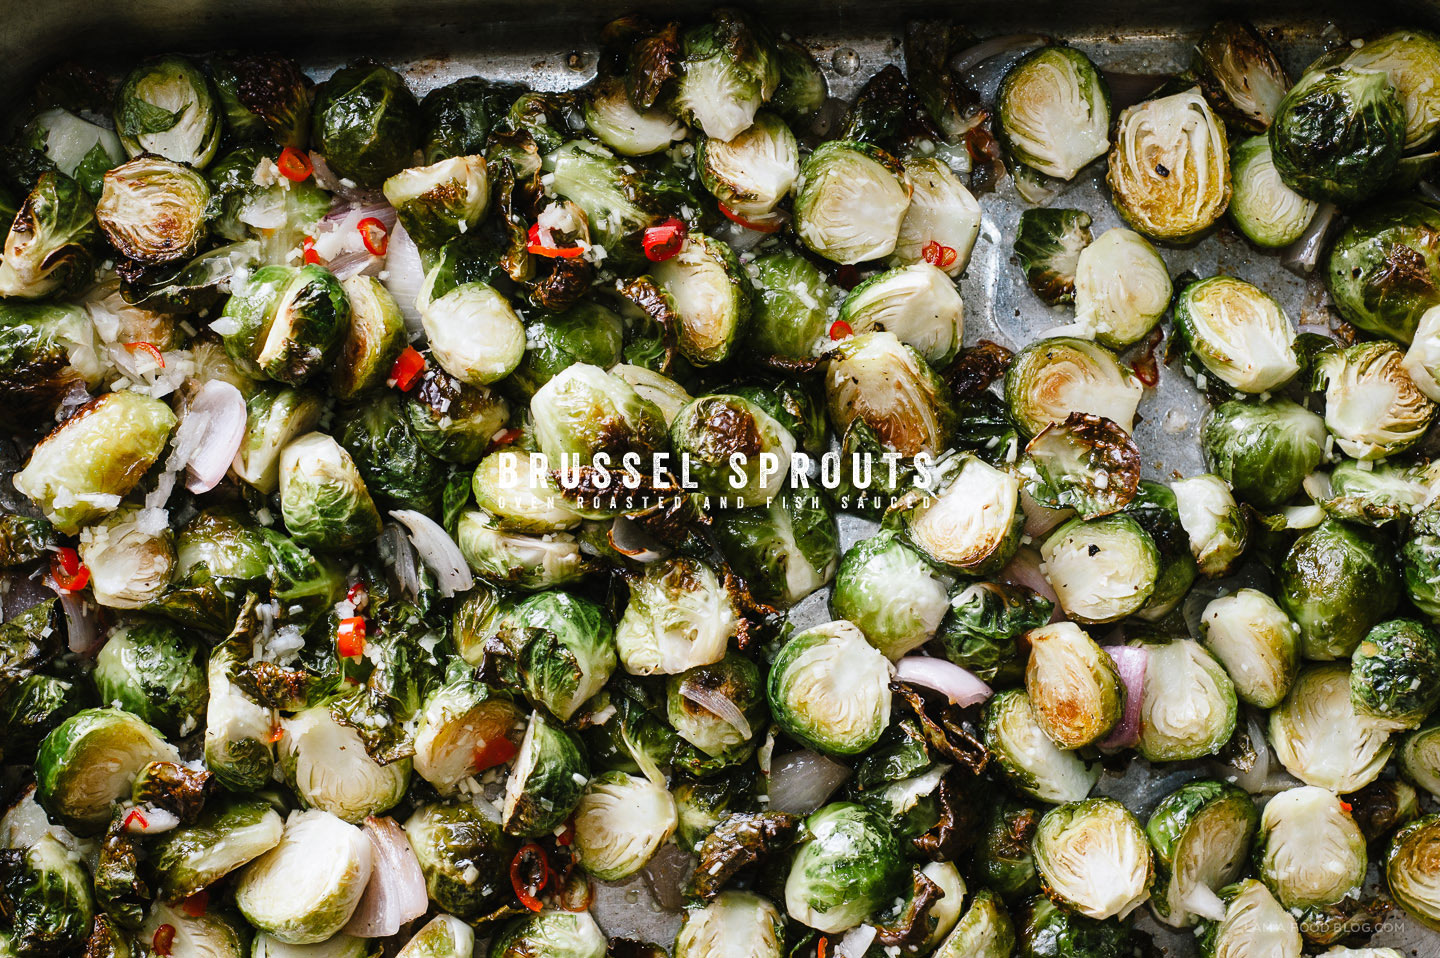 oven roasted brussel sprouts with fish sauce recipe - www.iamafoodblog.com